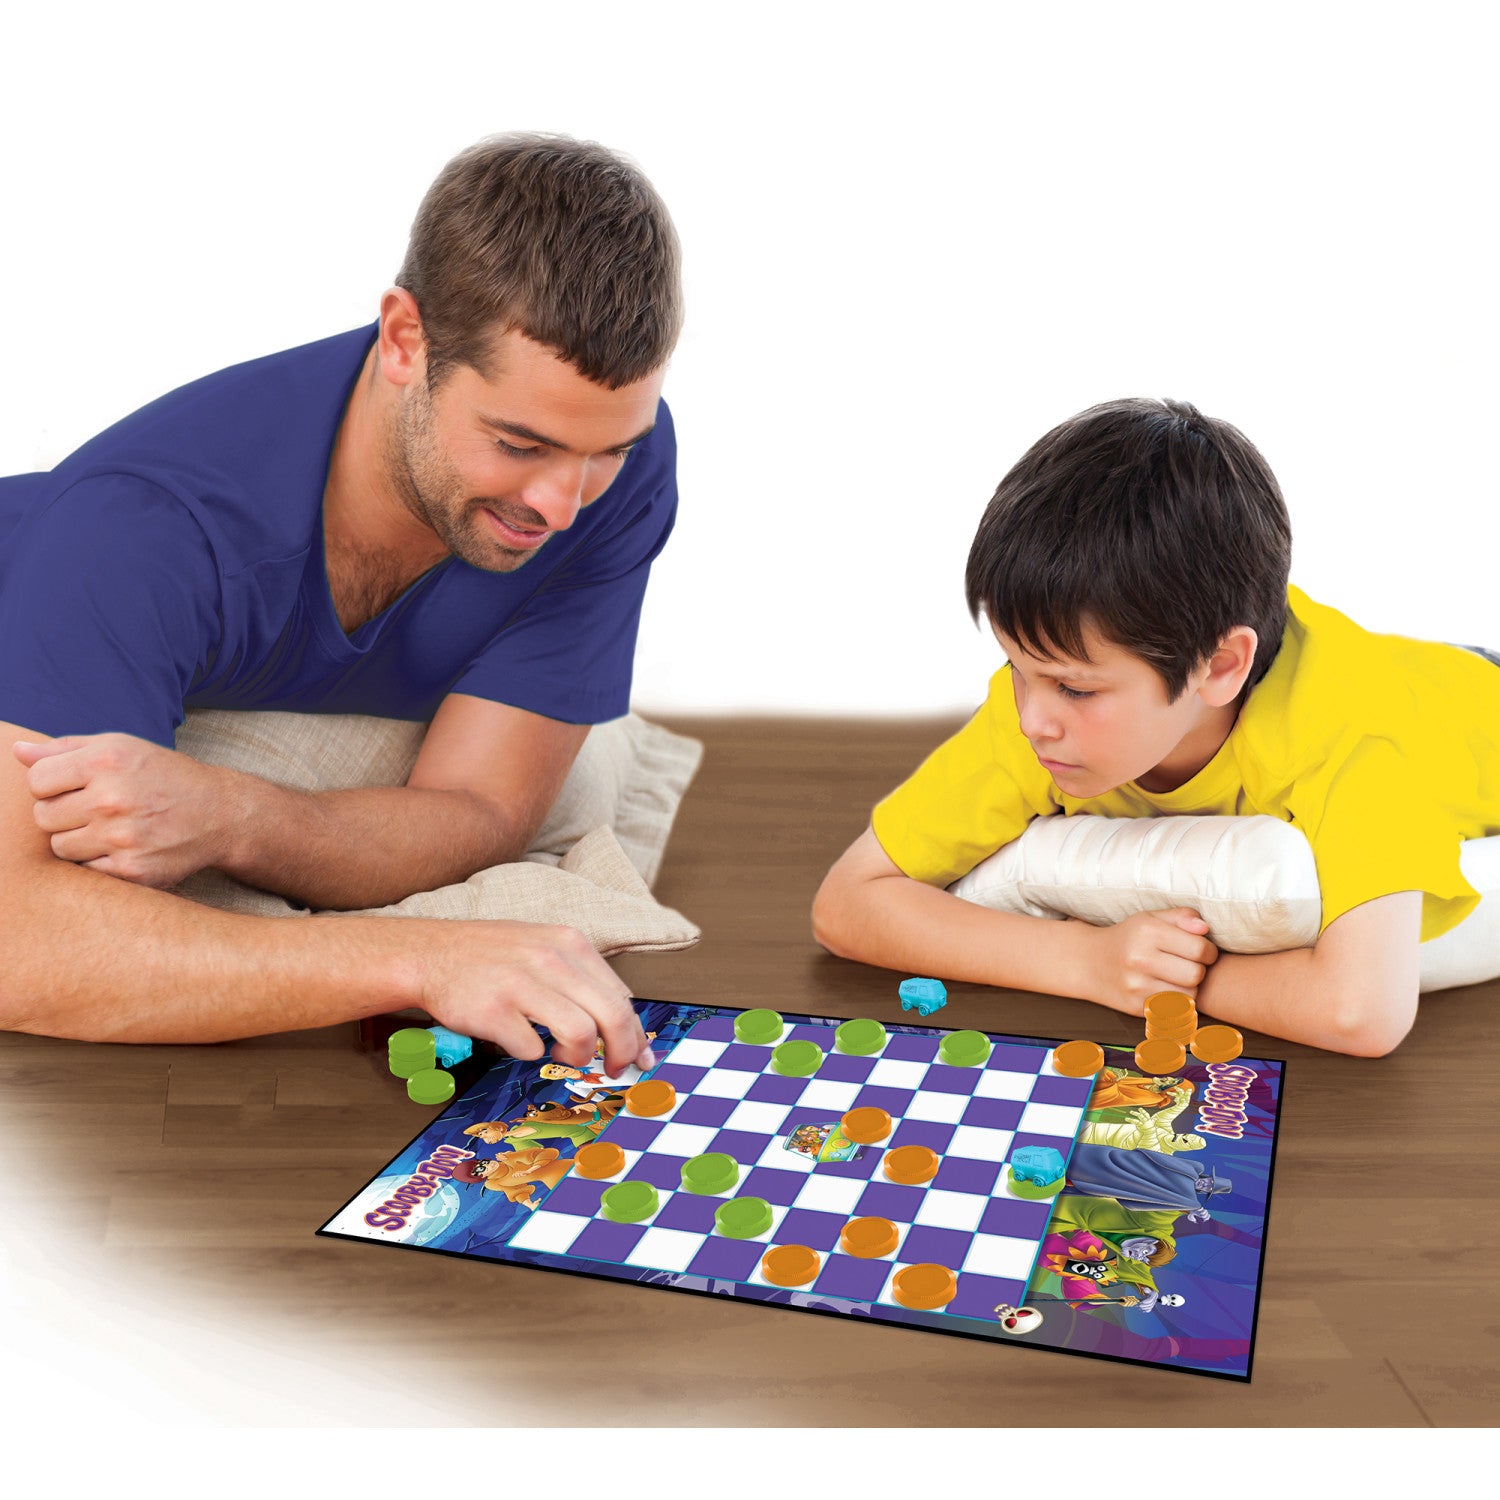 Scooby-Doo! Checkers Board Game Board Game